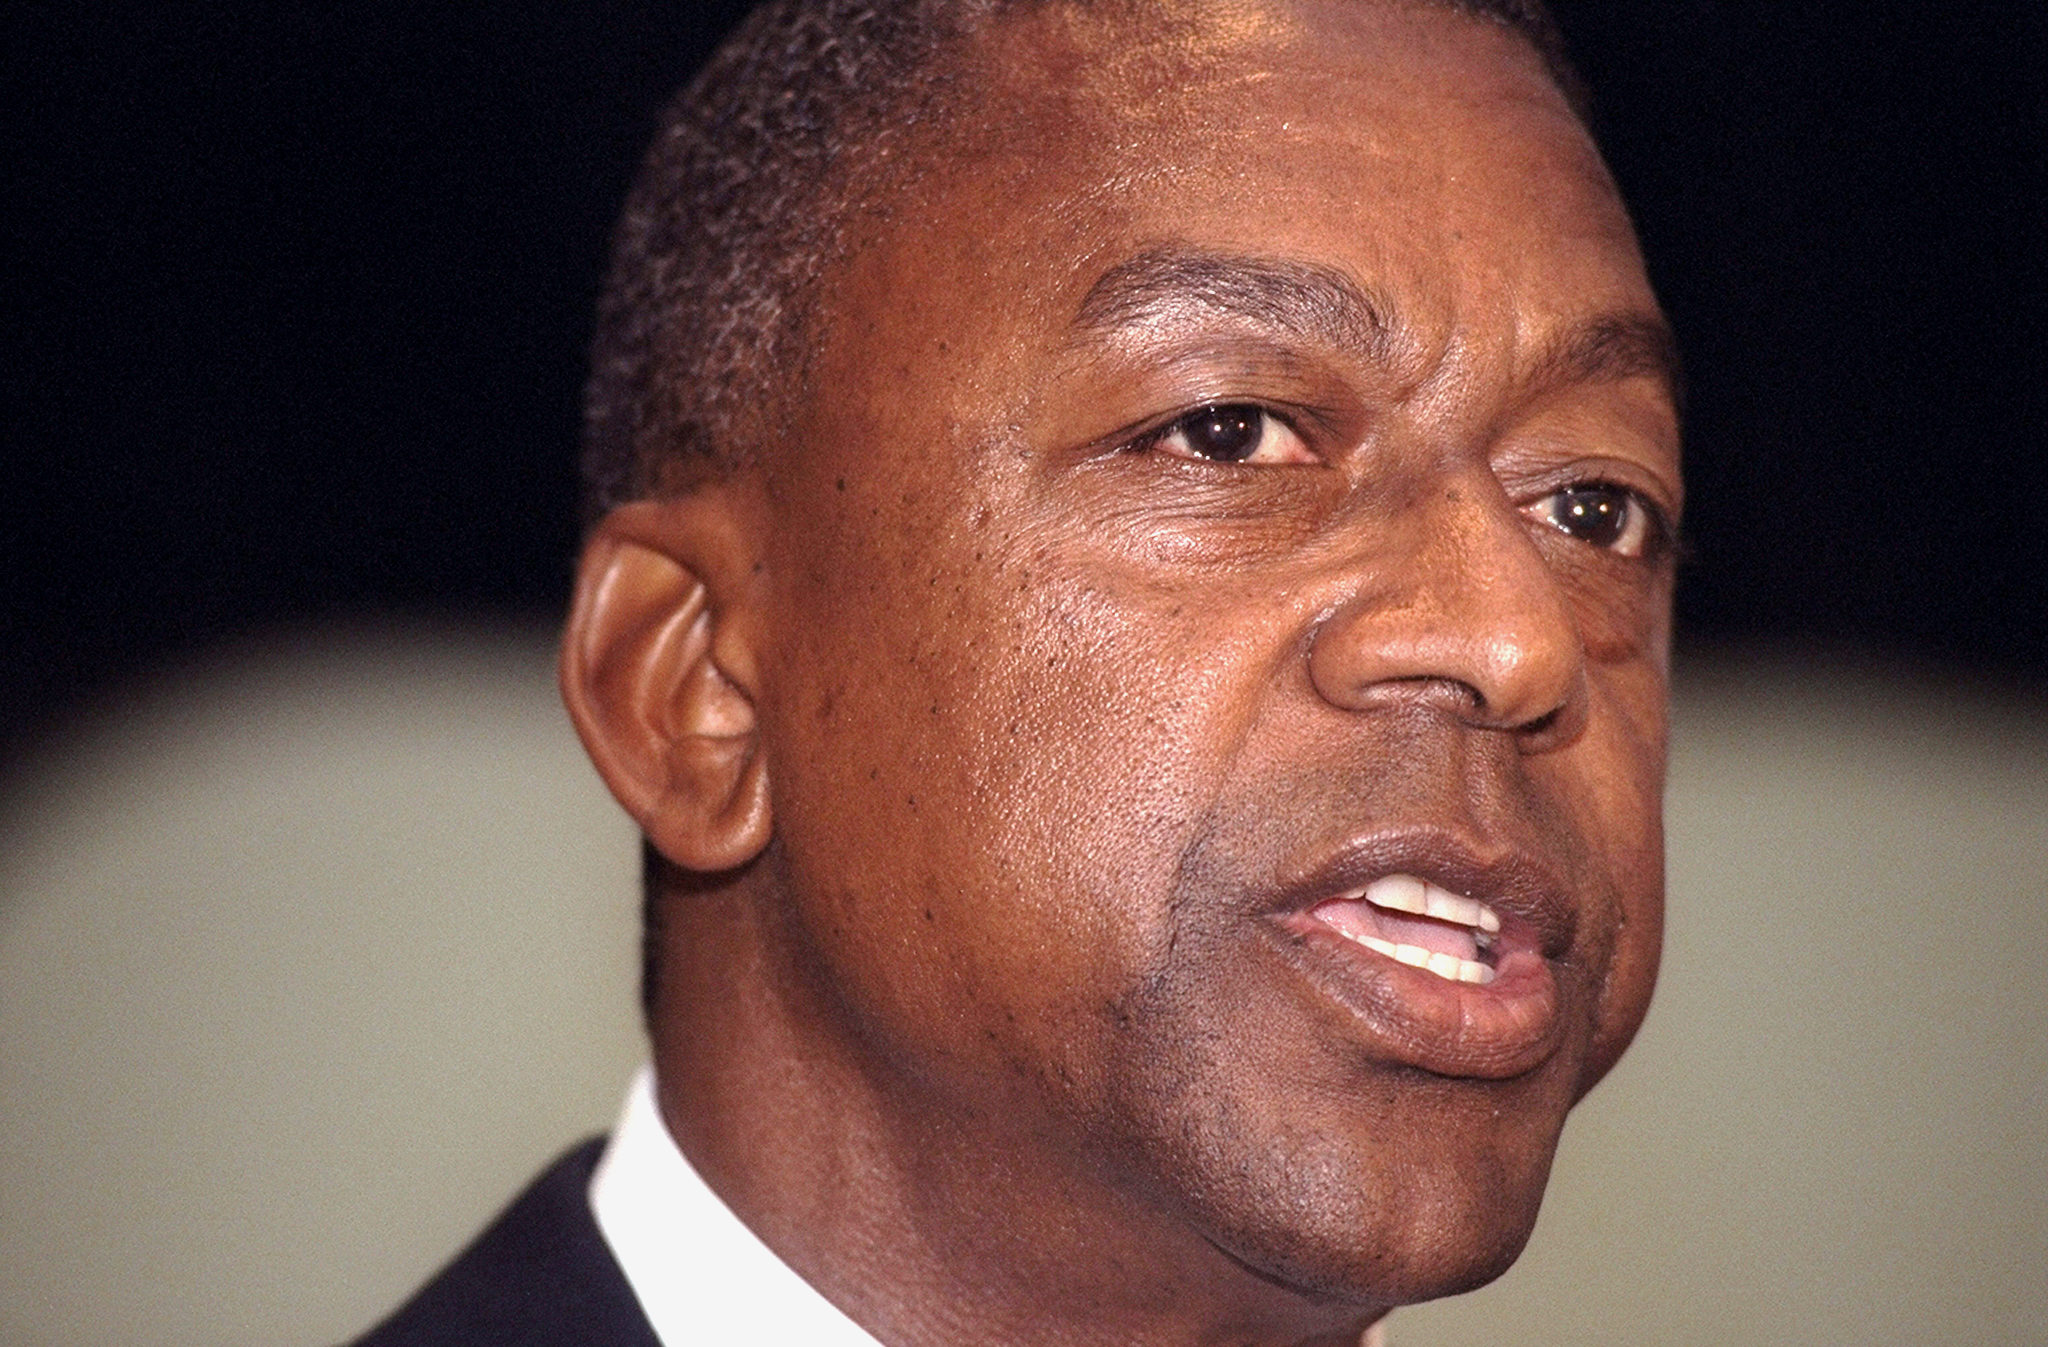 BET Founder Rolls Out New Consortium To Help Black Americans Save $619 Billion Over a Generation